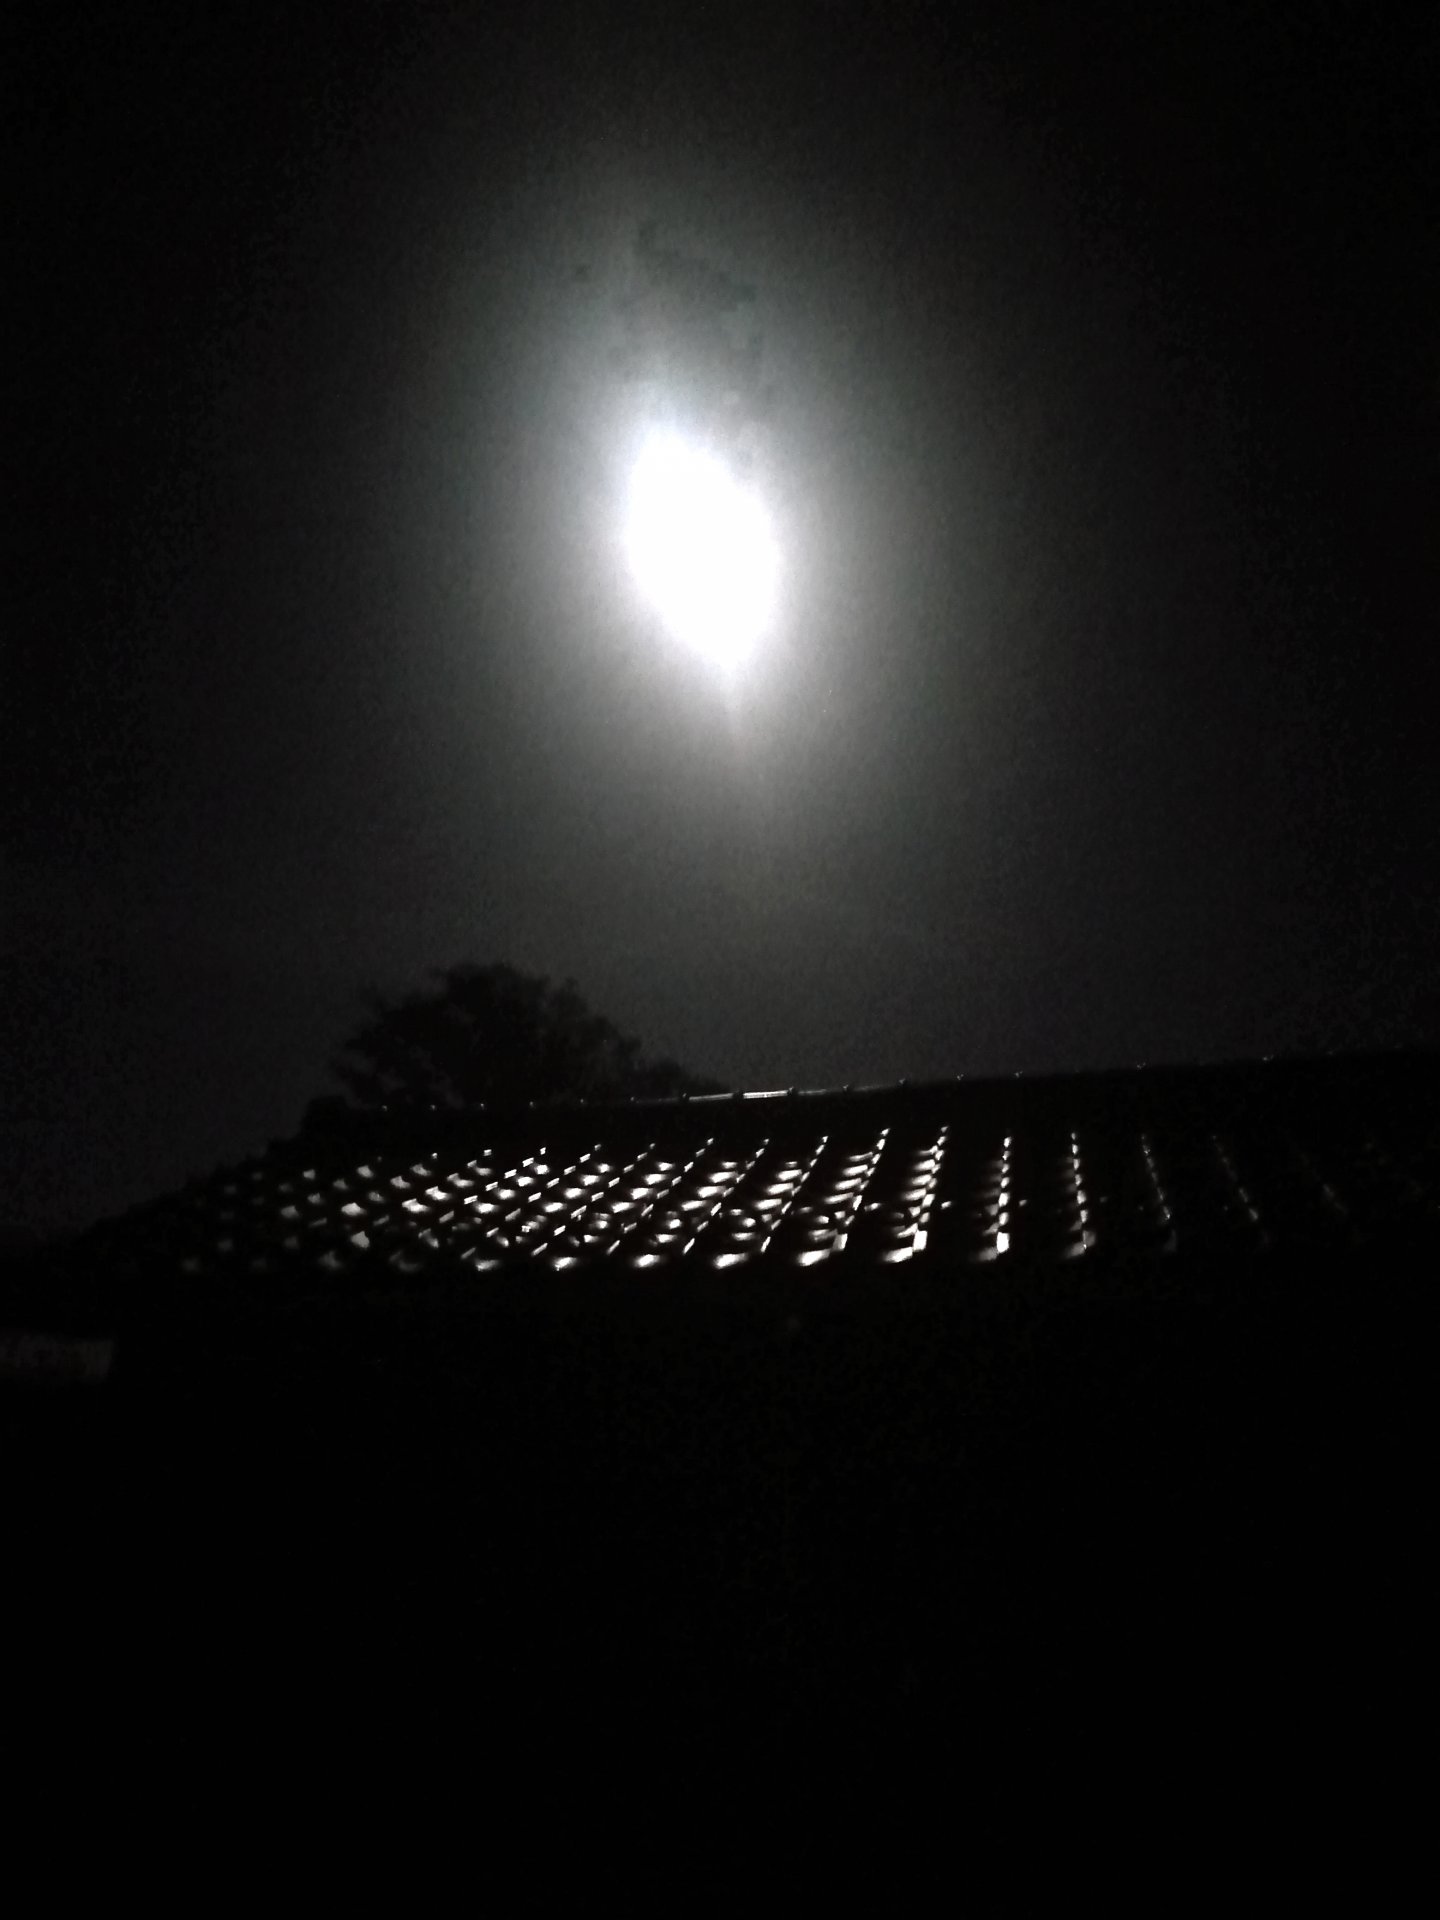 Nearly full moon reflecting off a tile roof.